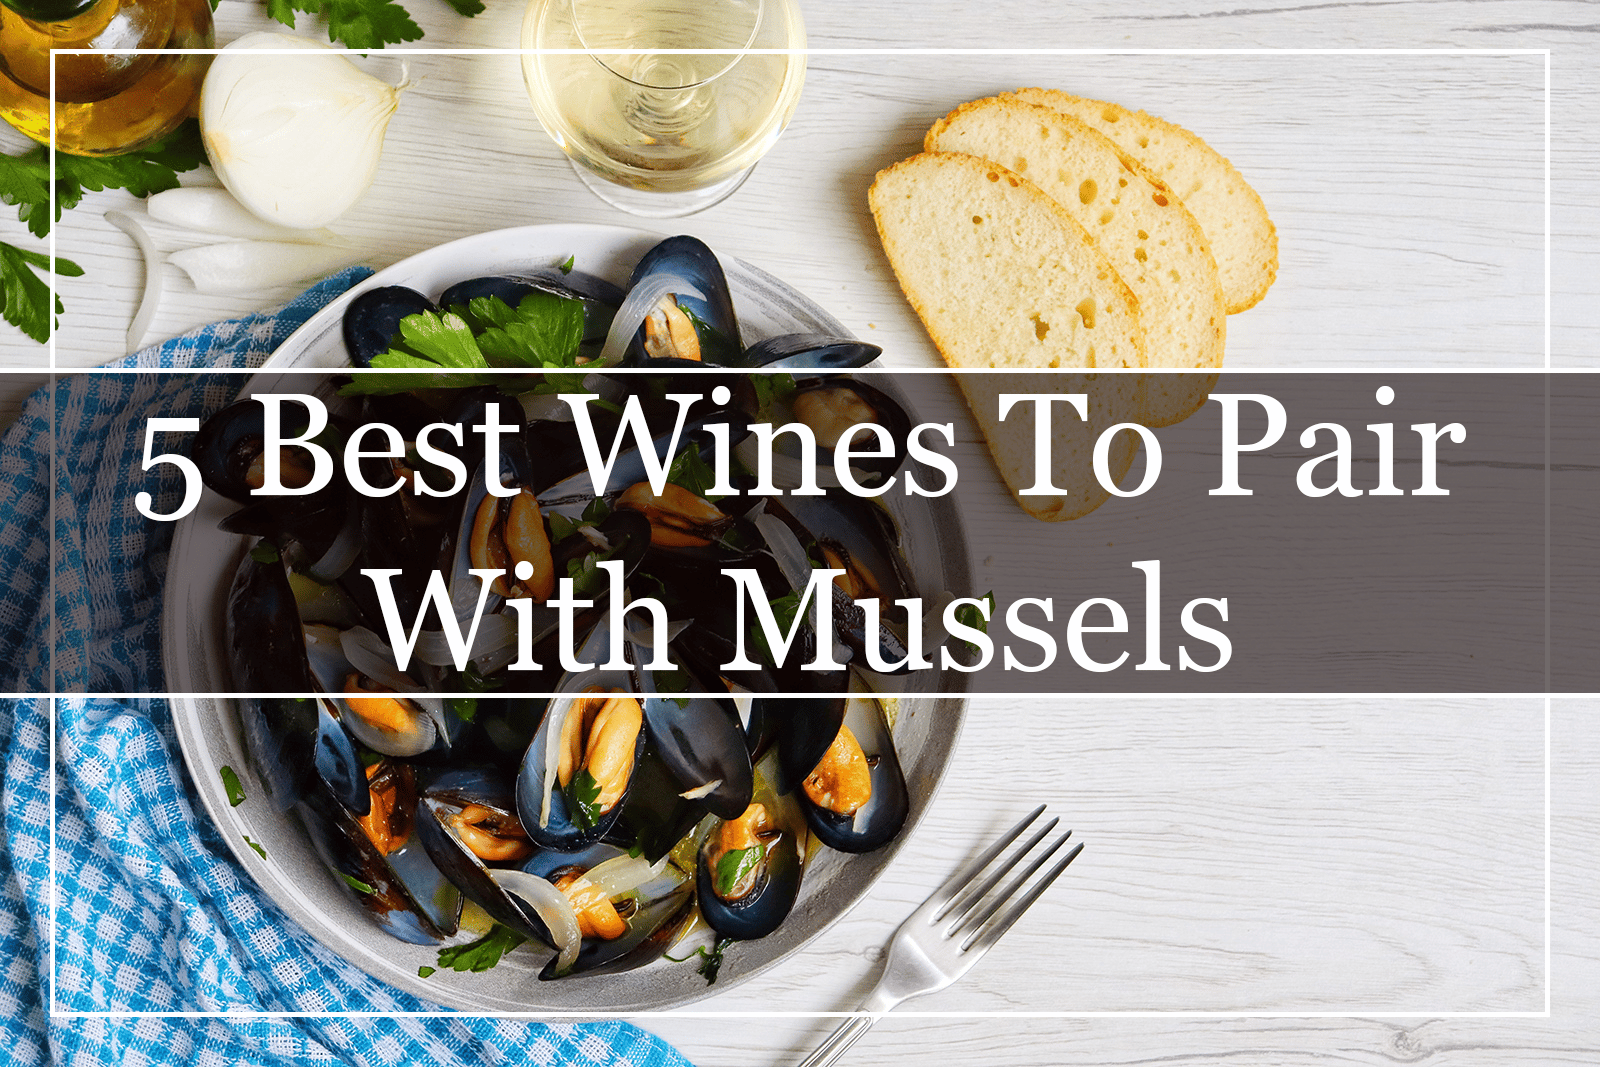 5 Best Wines to Pair With Mussels (2022)